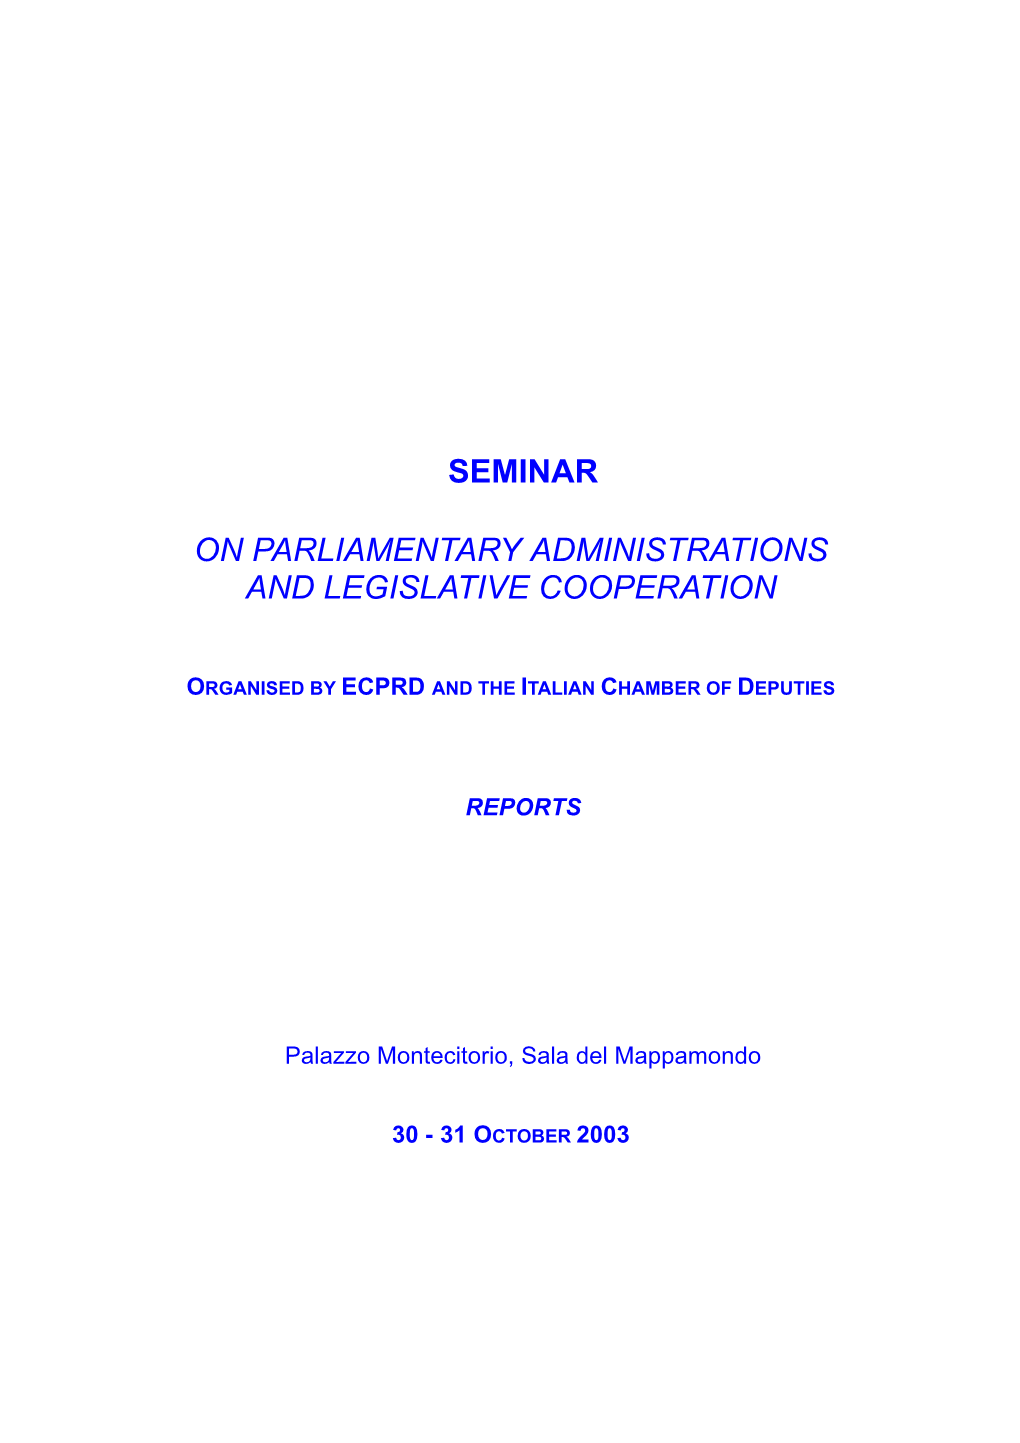 Seminar on Parliamentary Administrations And